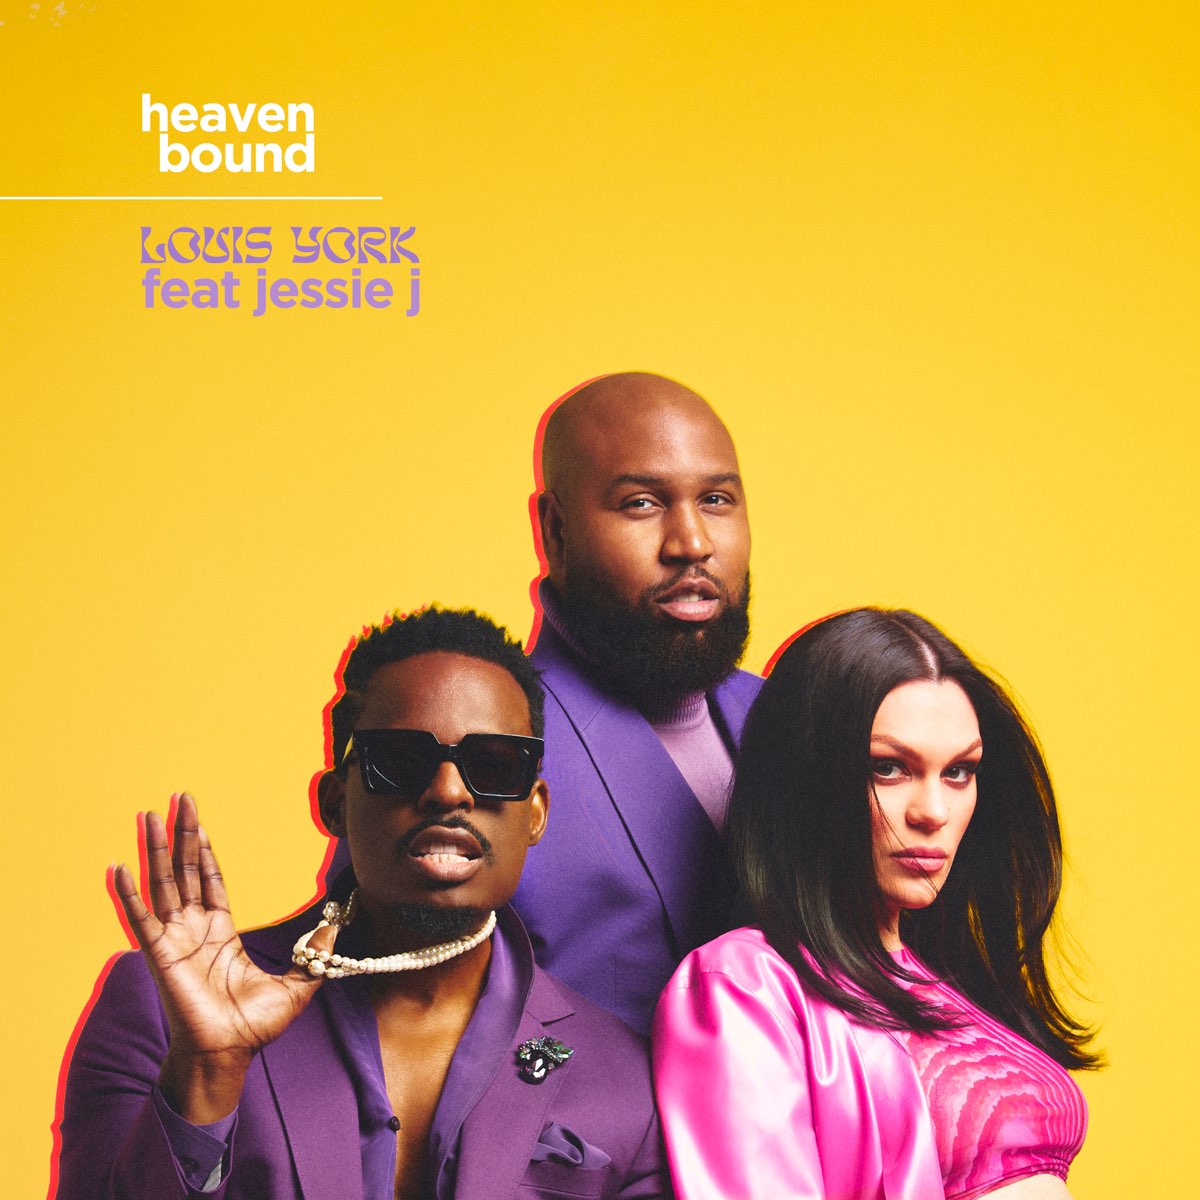 ‎heaven Bound Single By Louis York And Jessie J On Apple Music